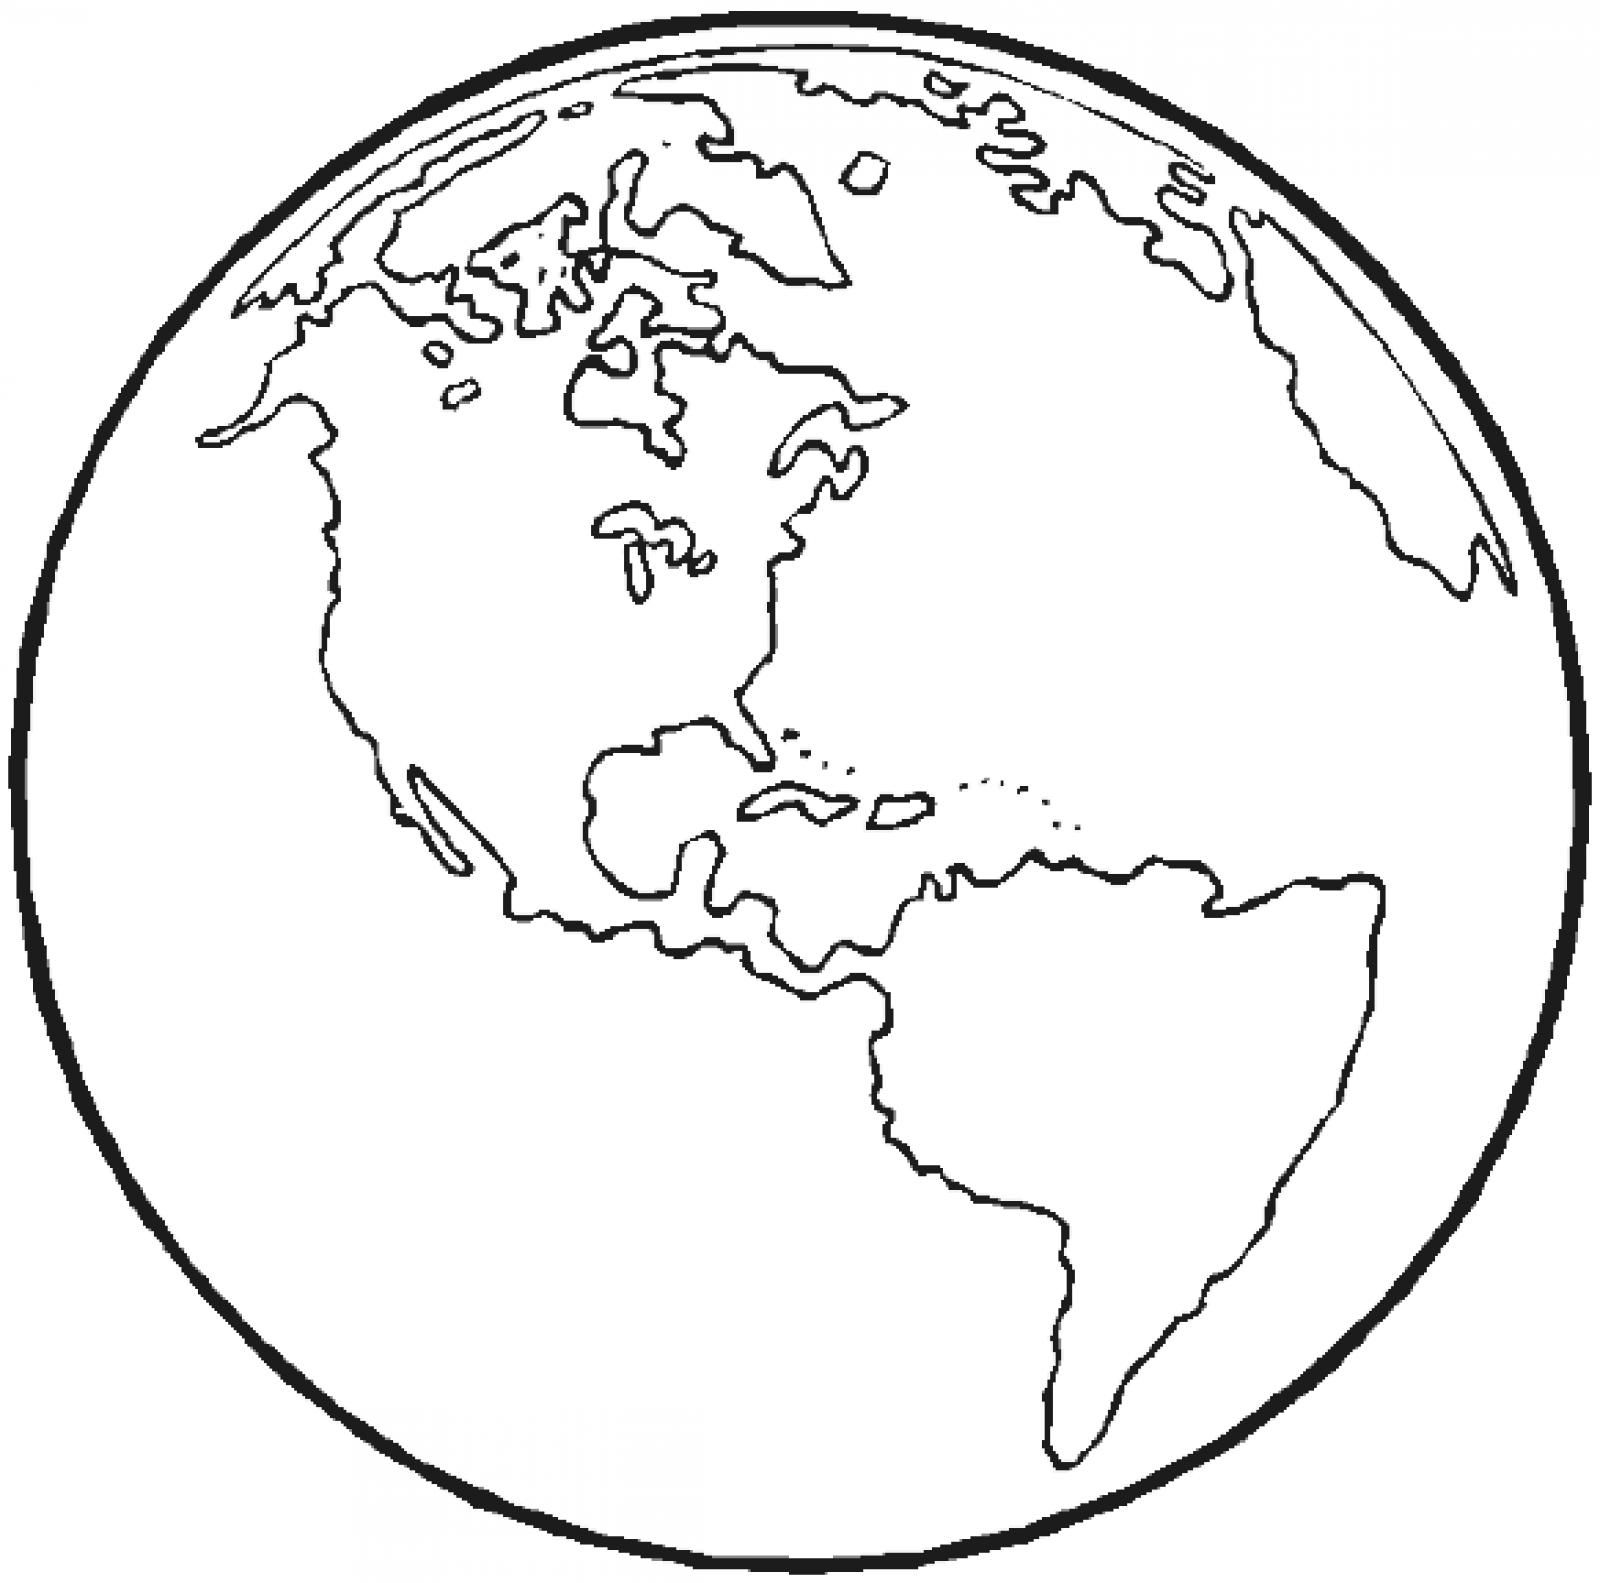 Free Printable Earth Coloring Pages For Kids | Earth Day | Earth - Earth Coloring Pages Free Printable